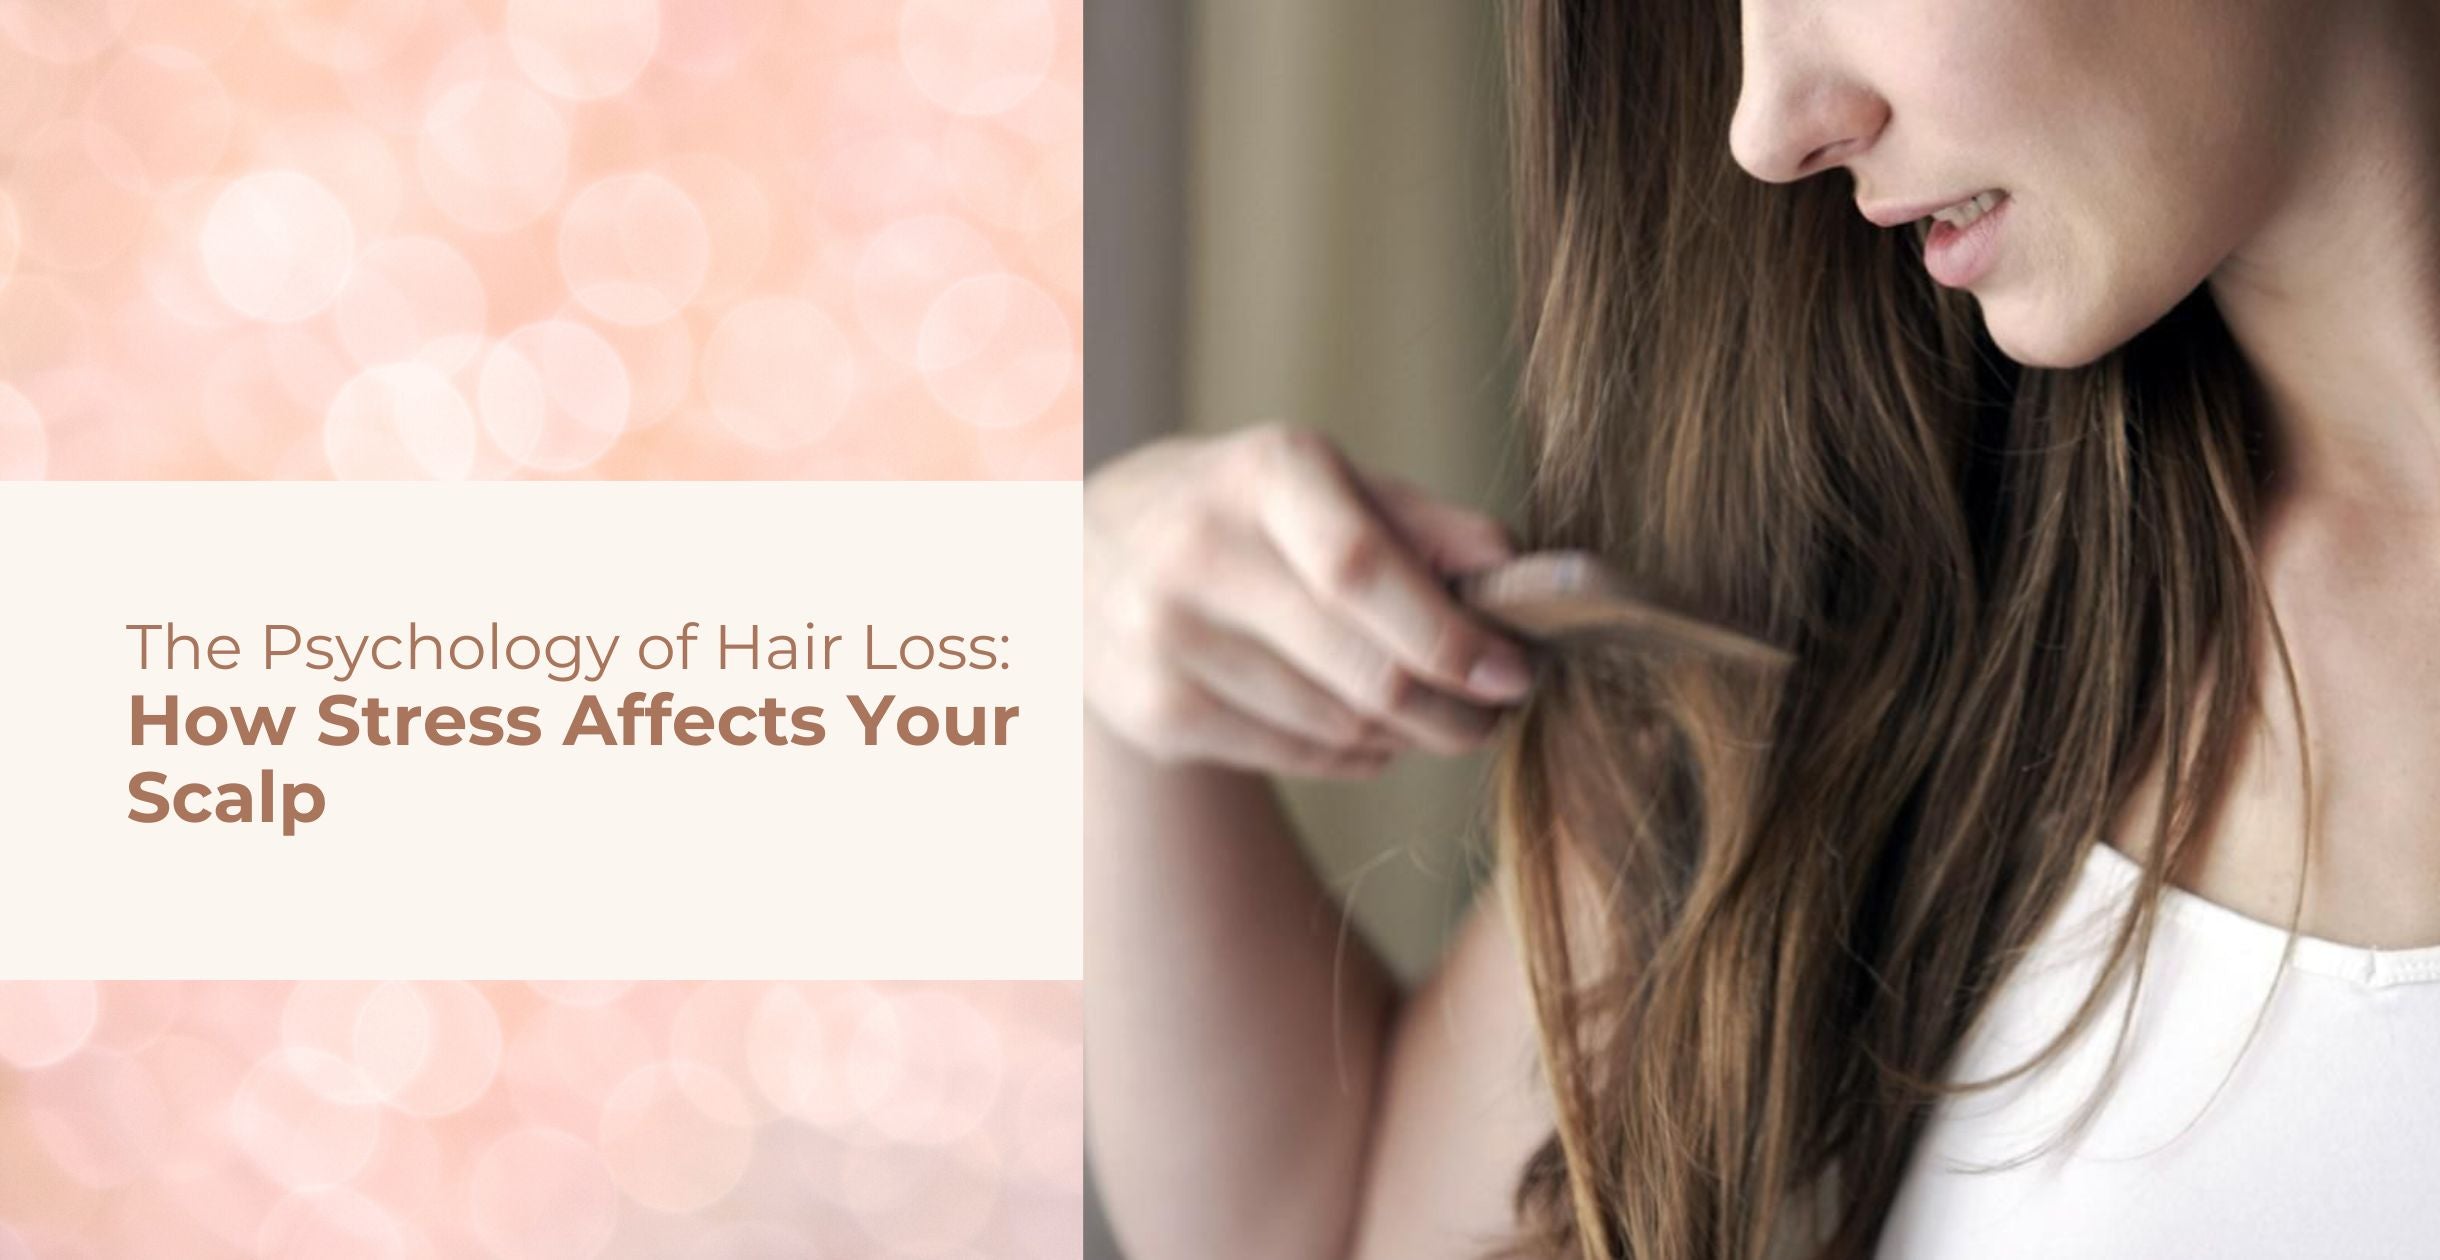 The Psychology of Hair Loss: How Stress Affects Your Scalp